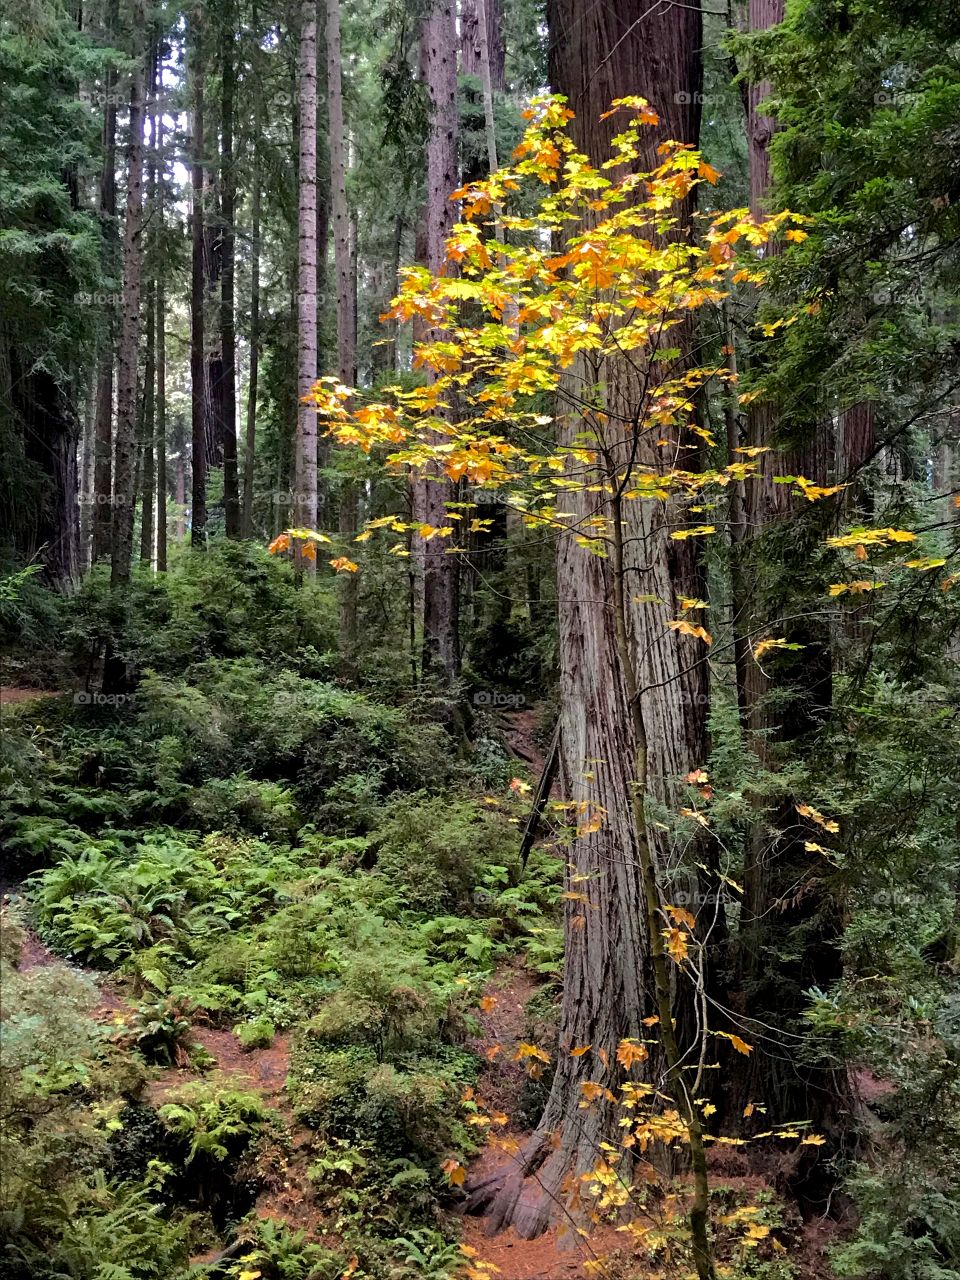 A Touch of Autumn in the Redwoods 